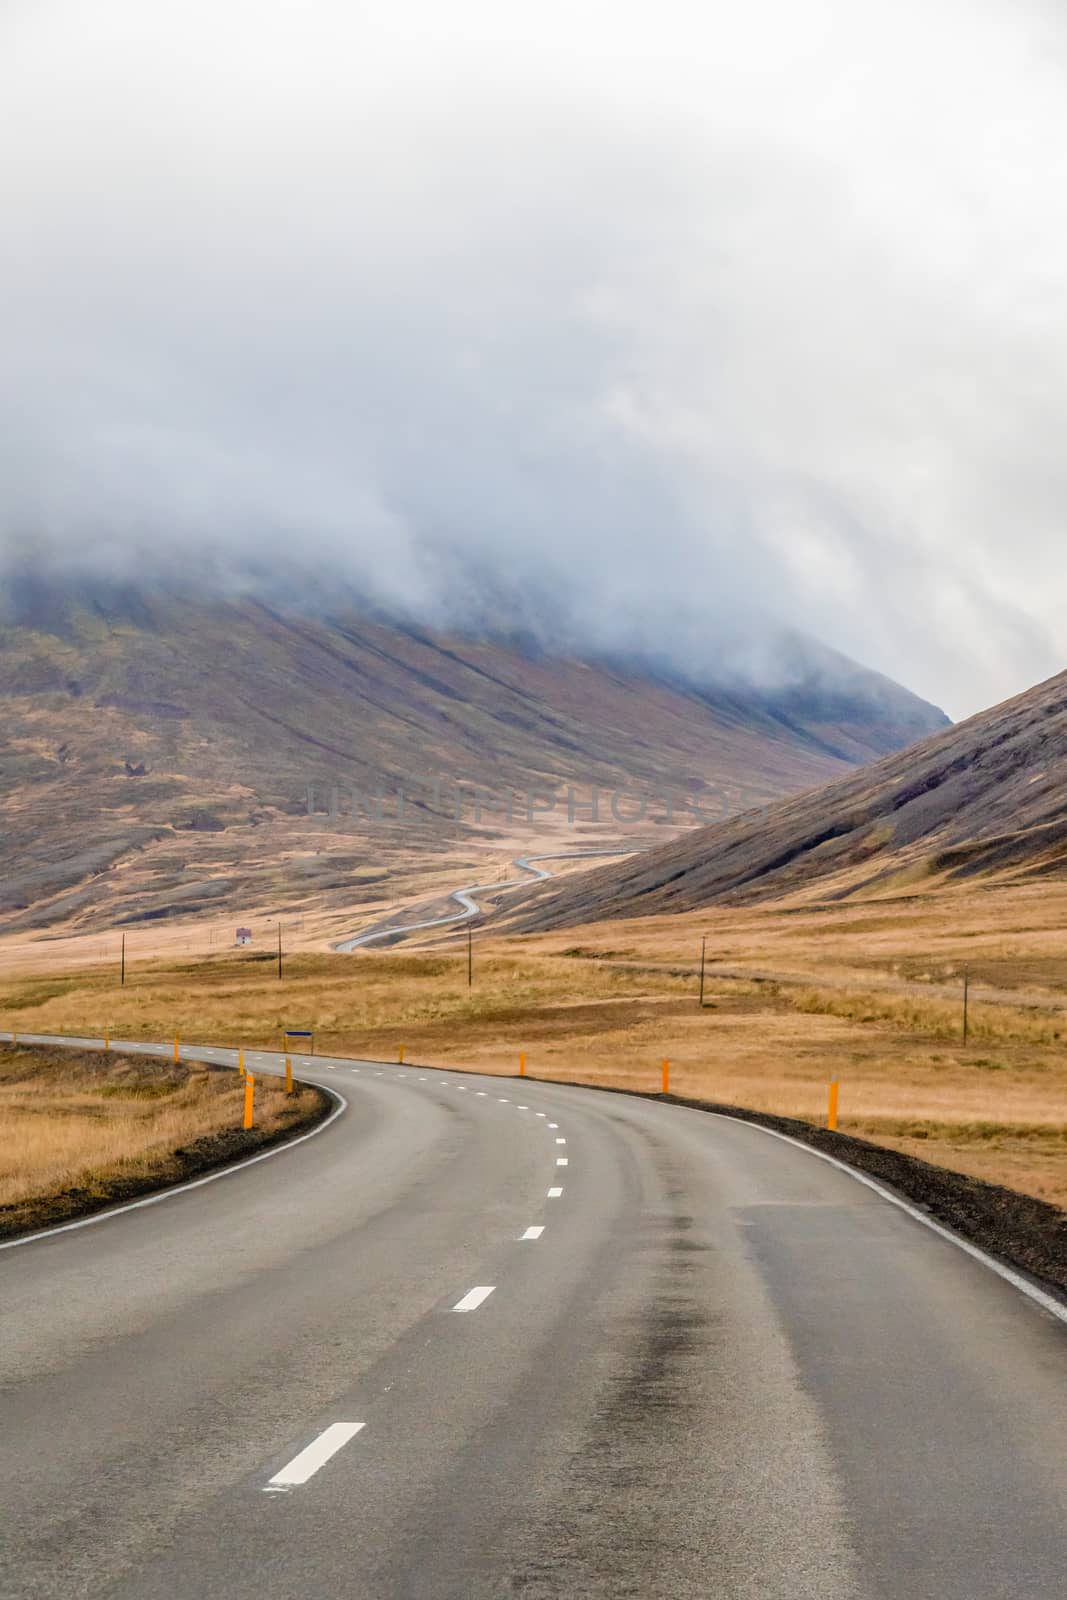 Northern Iceland empty road winding through valley upwards a mountain during grey weather by MXW_Stock